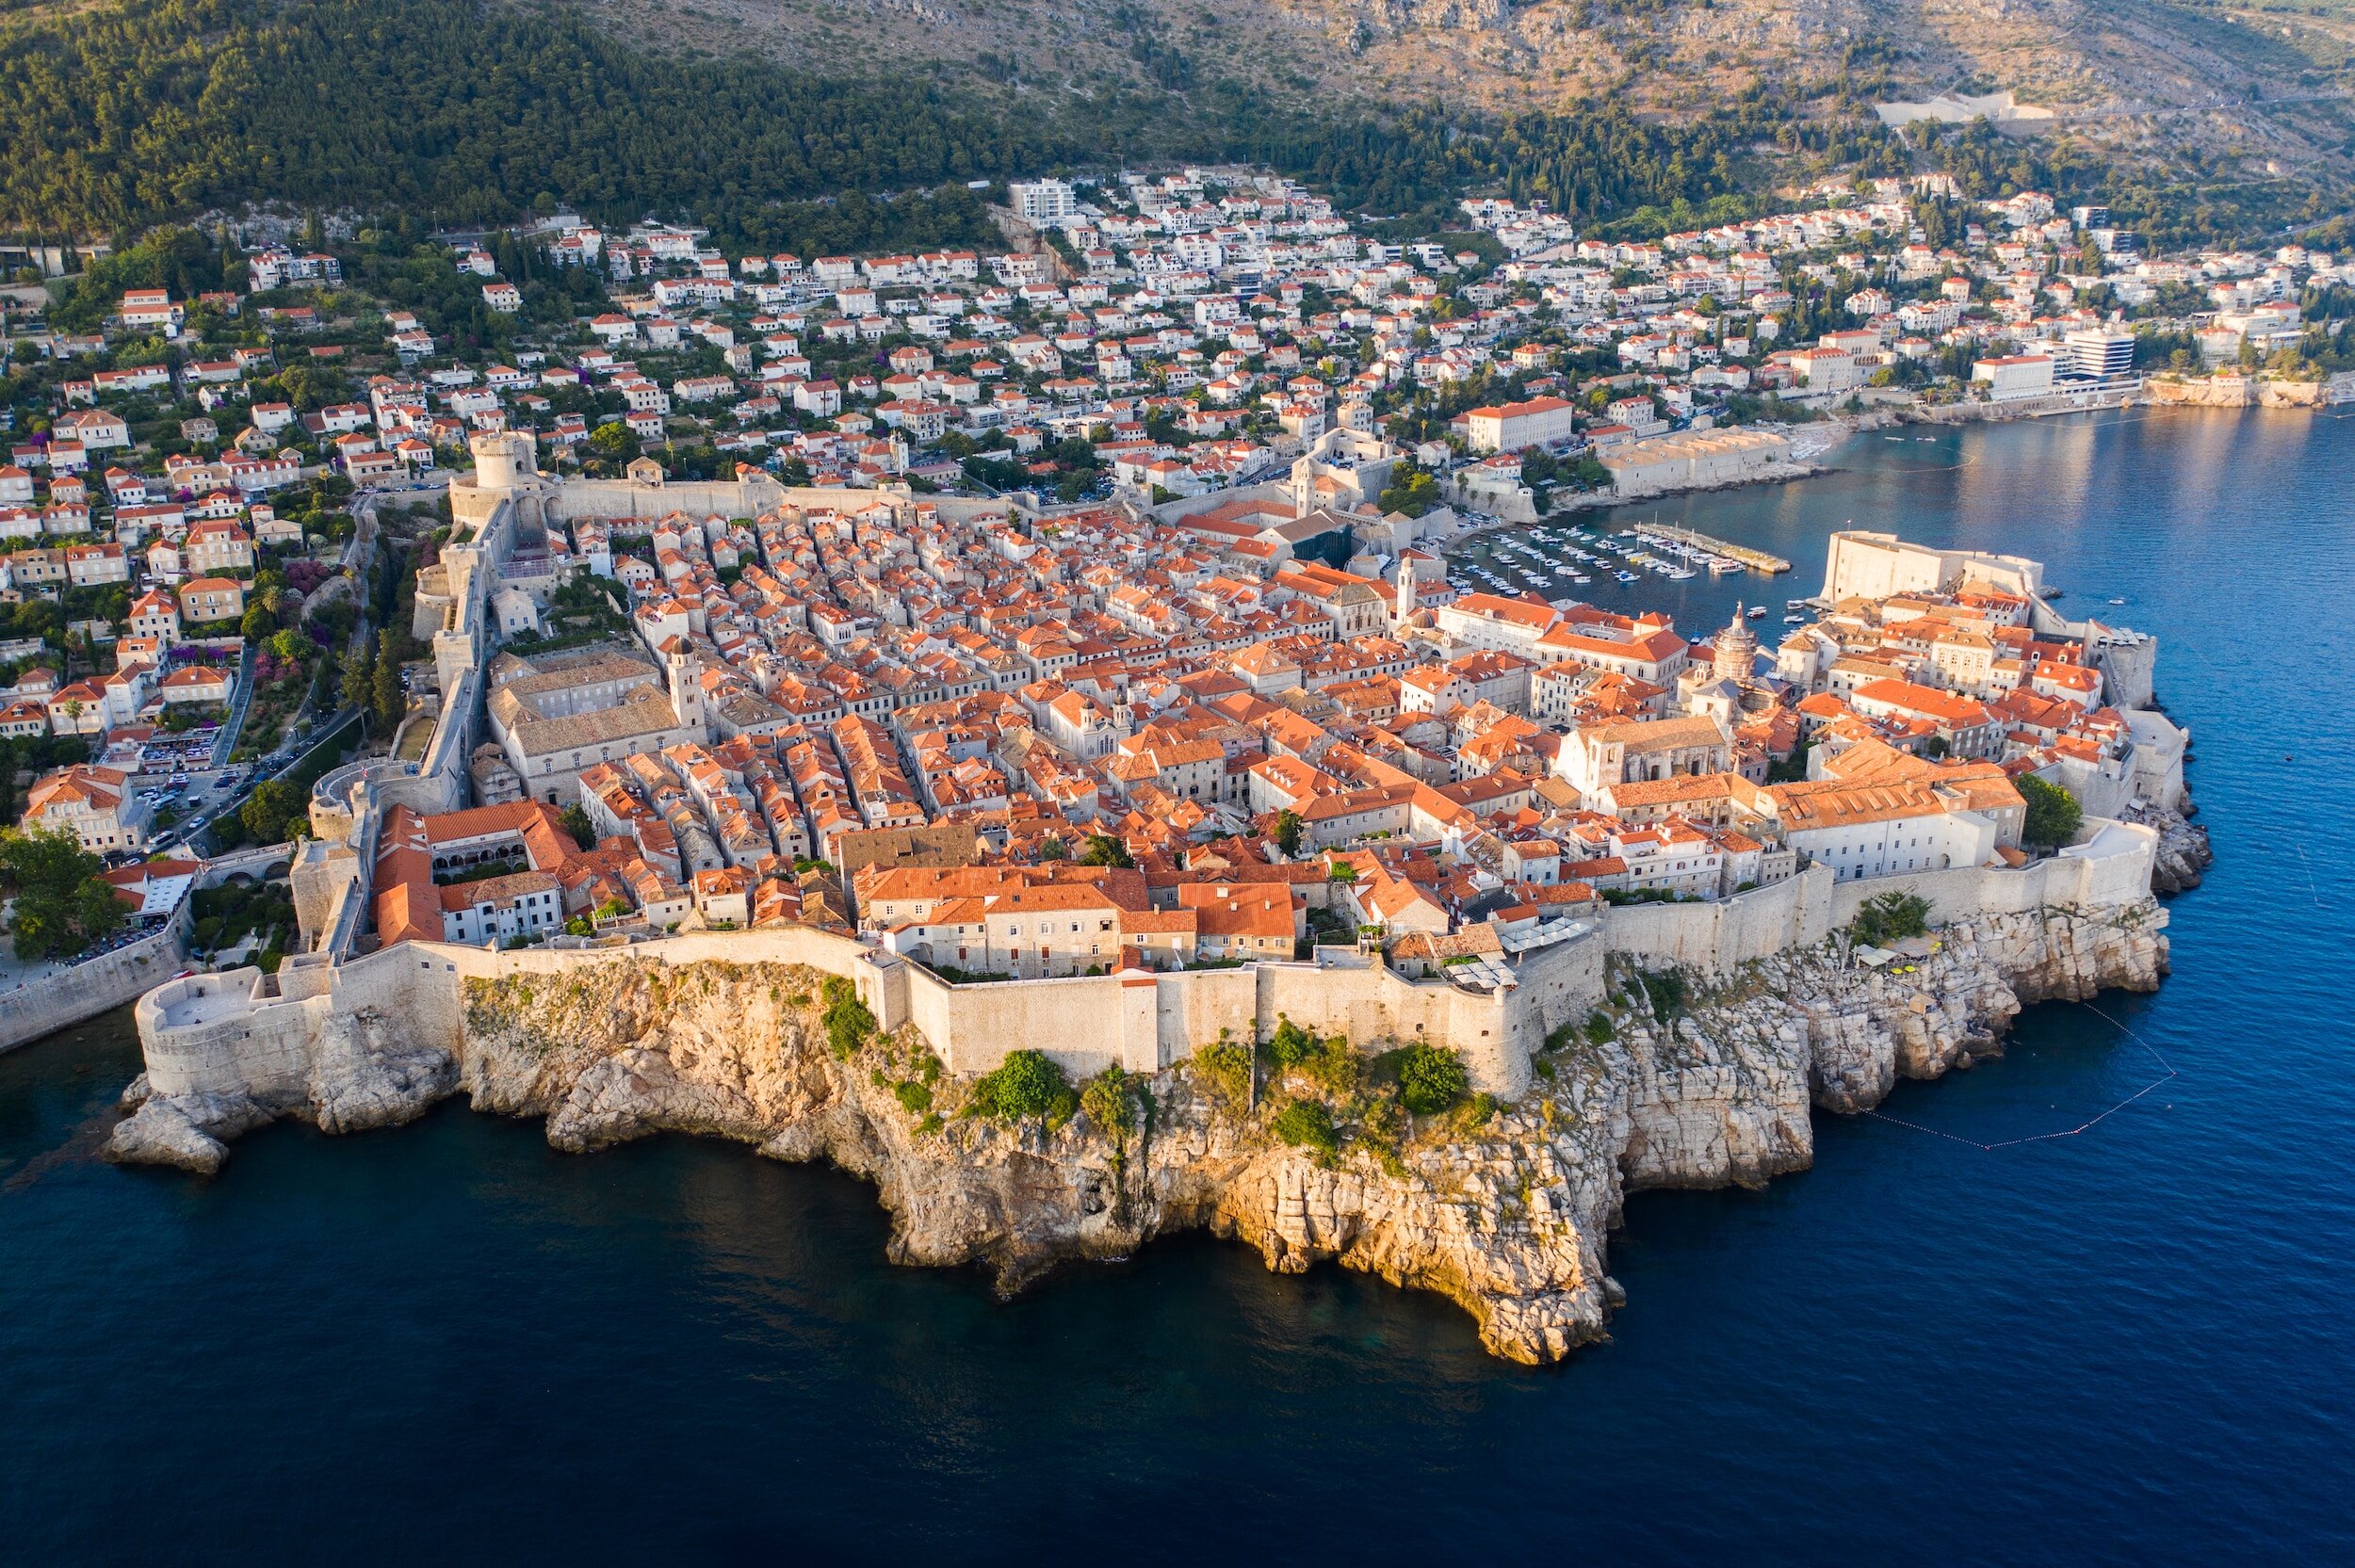 Dubrovnik's red tile roofs and historic core, surrounded by walls and jutting out into the water, seen from above.